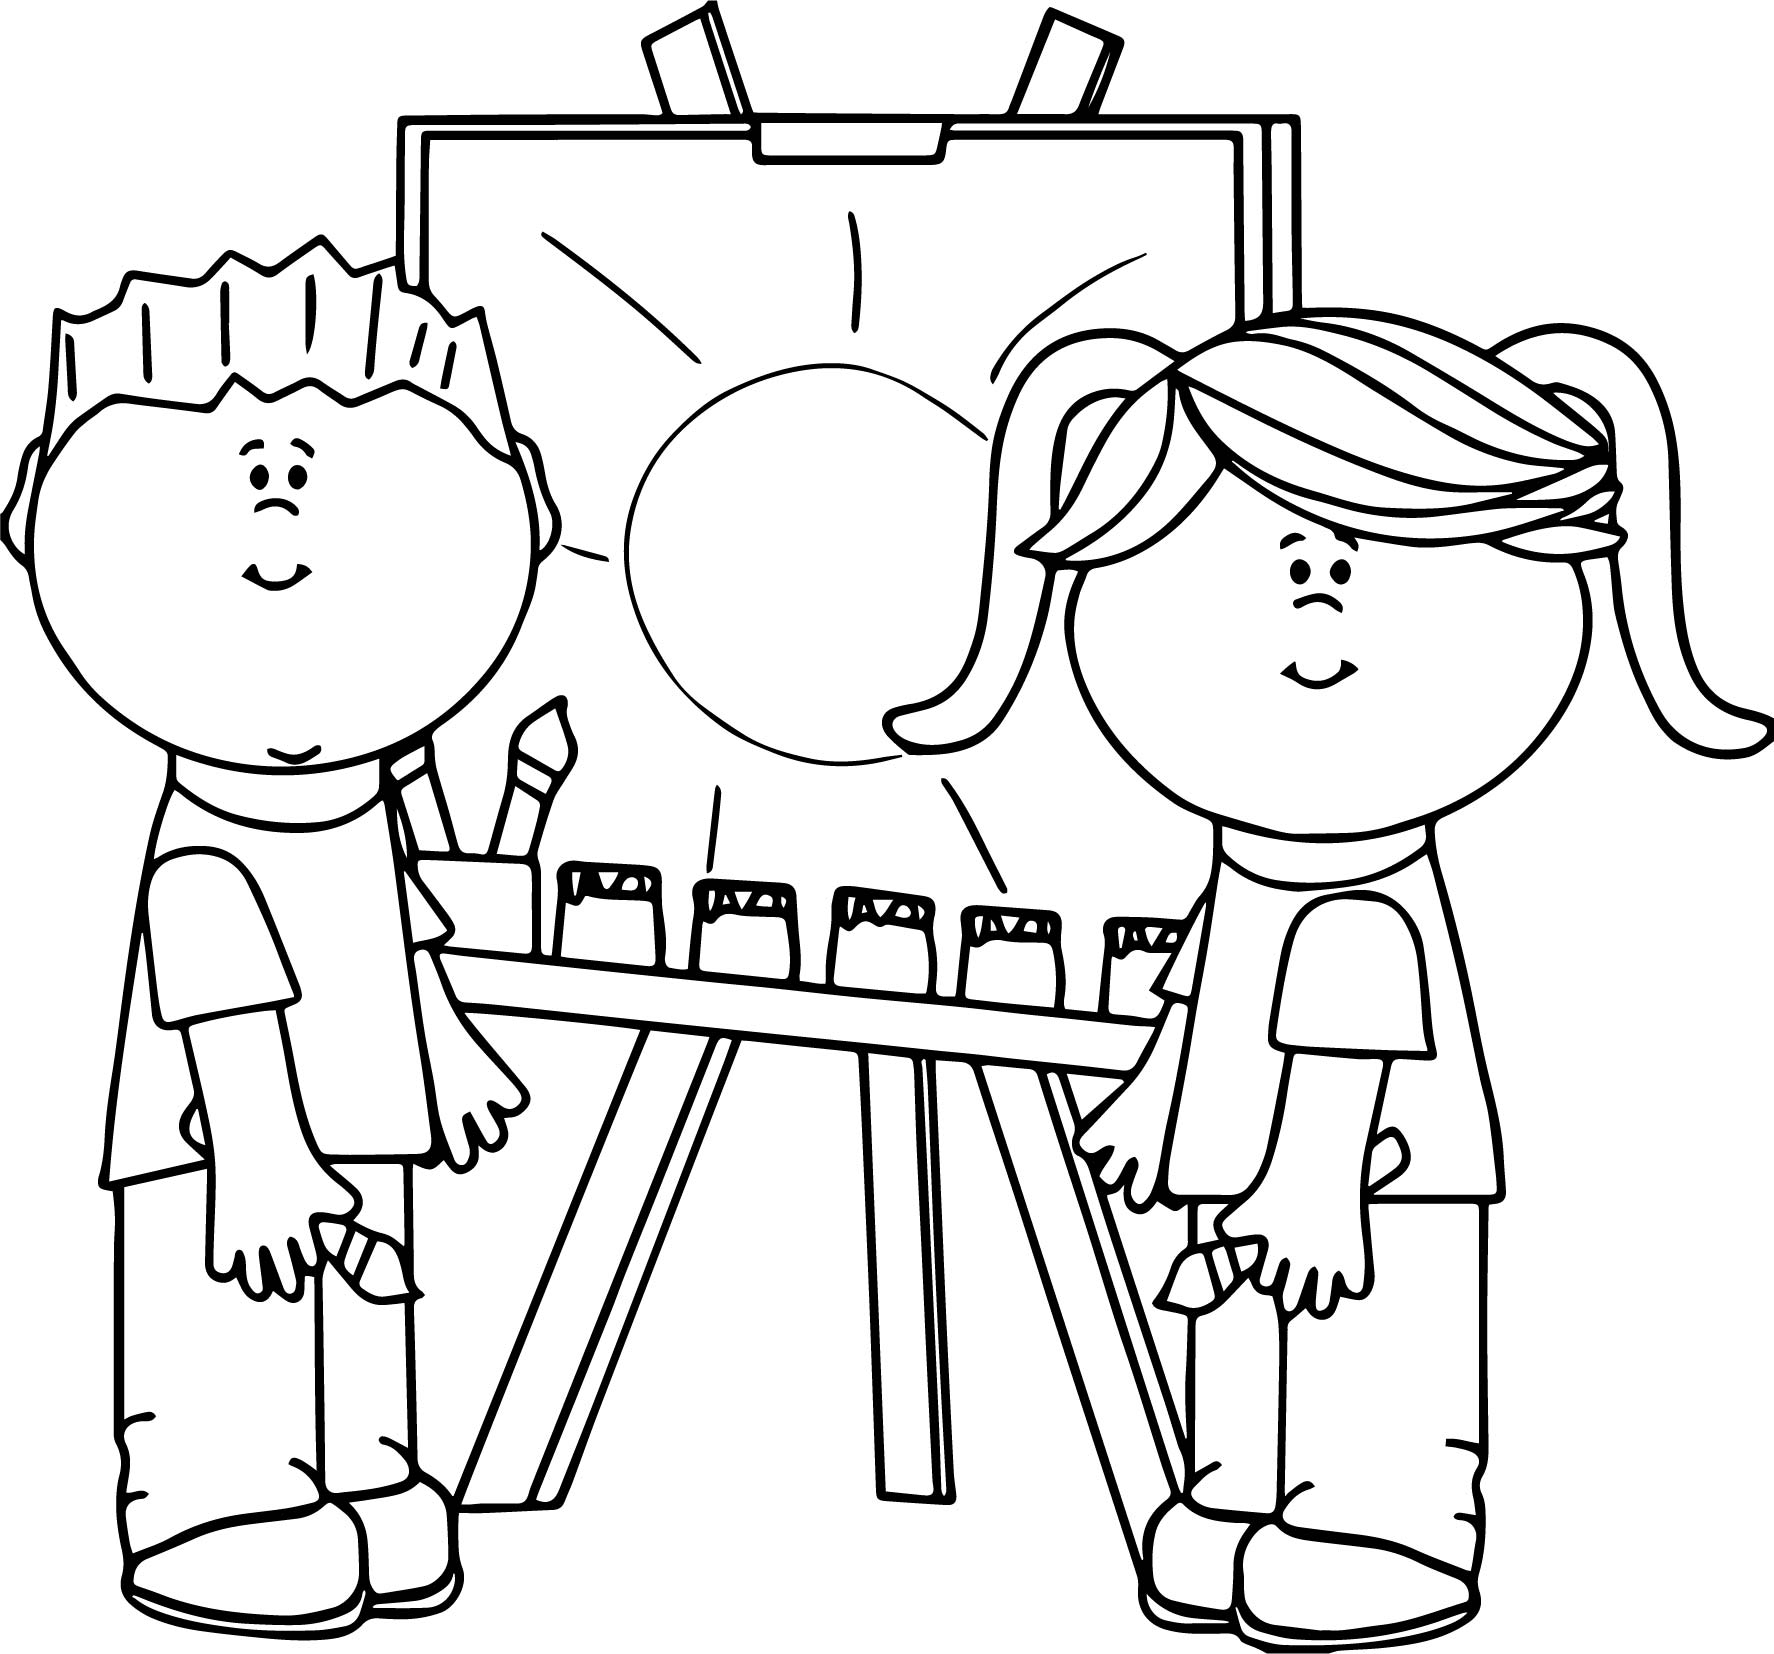 Coloring Pages For Paint Program At Getcolorings.com | Free Printable